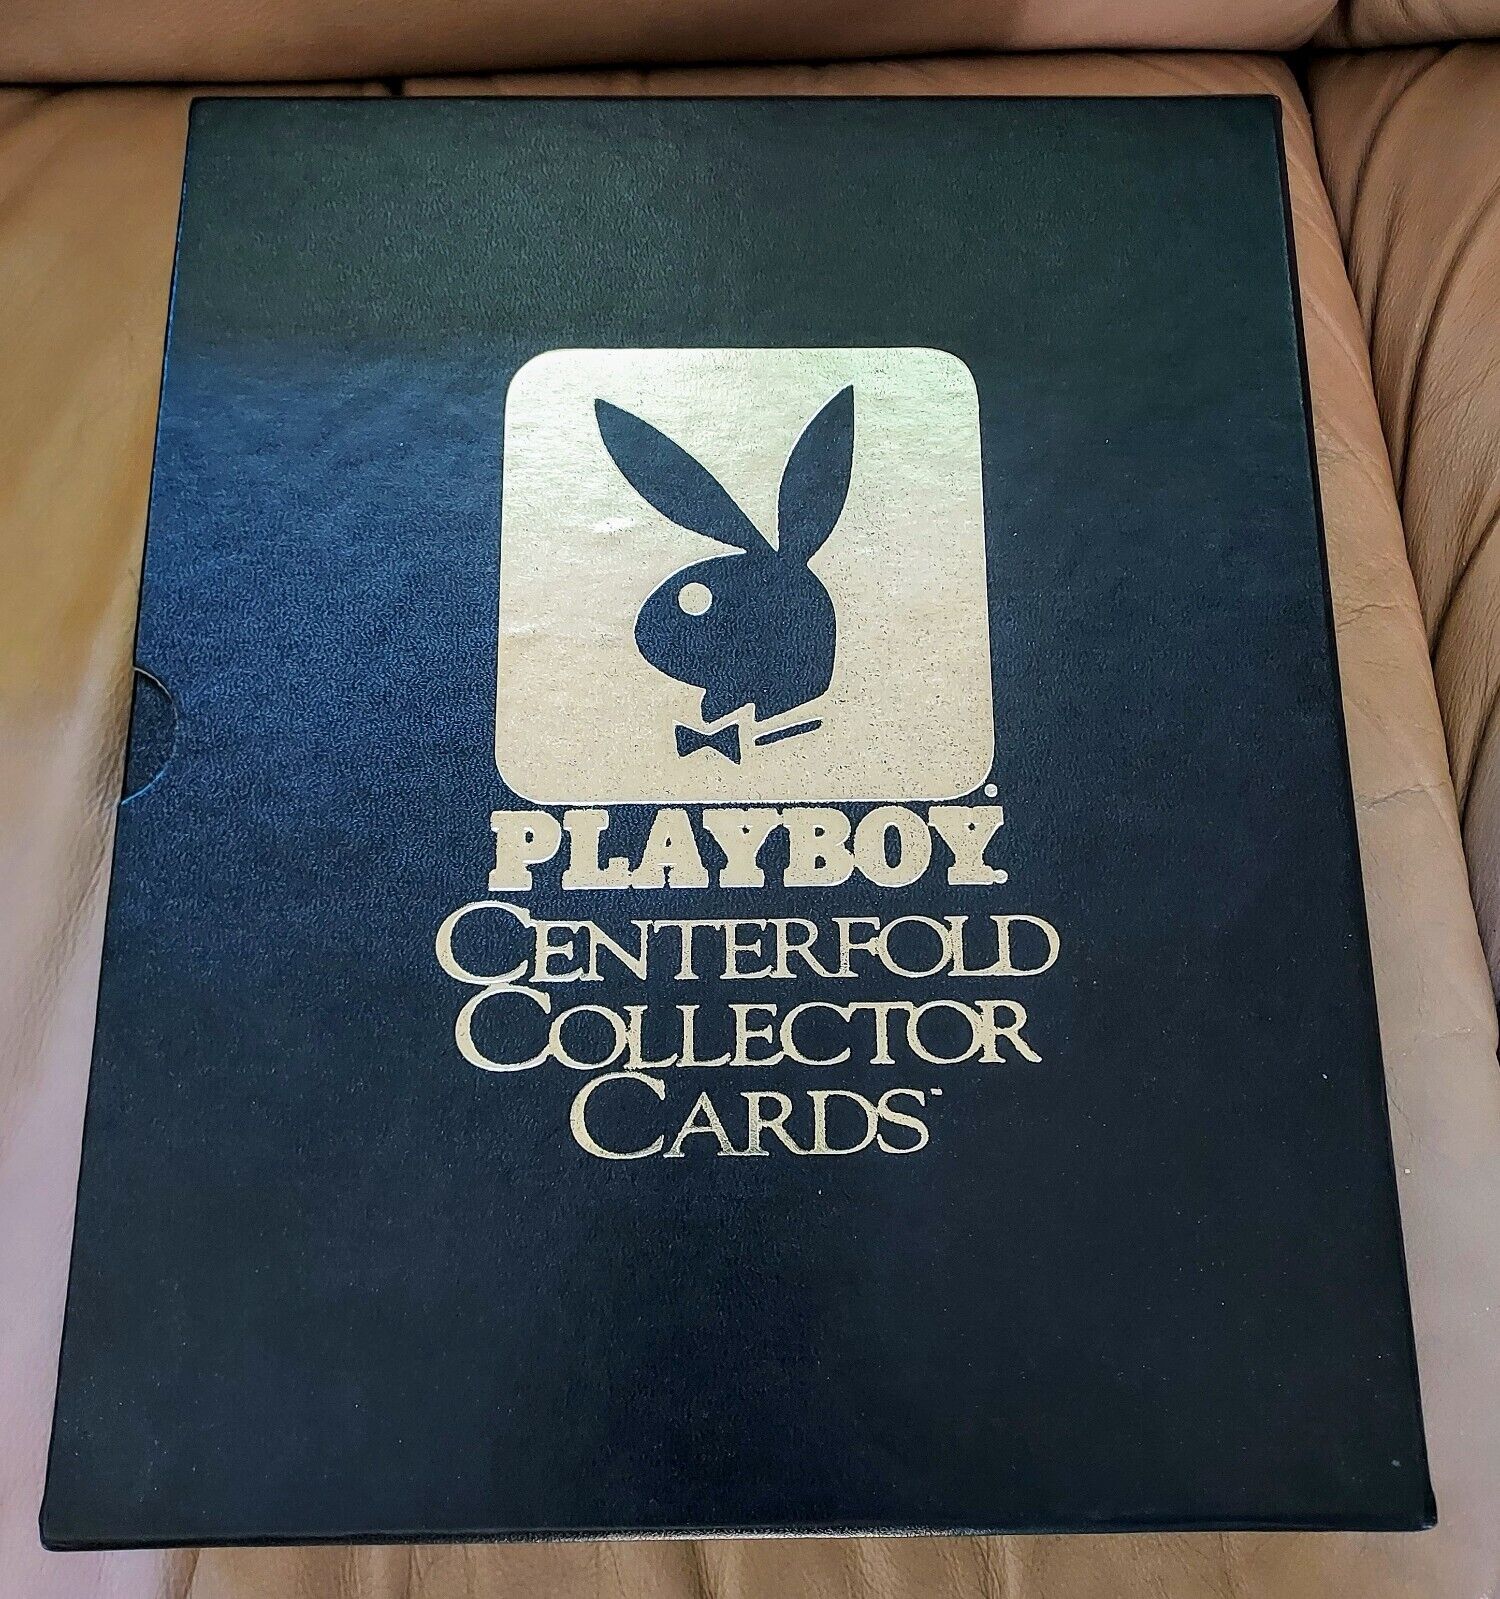 Playboy Centerfold Collector Cards SportsTime Ent April 1954 to April 1993